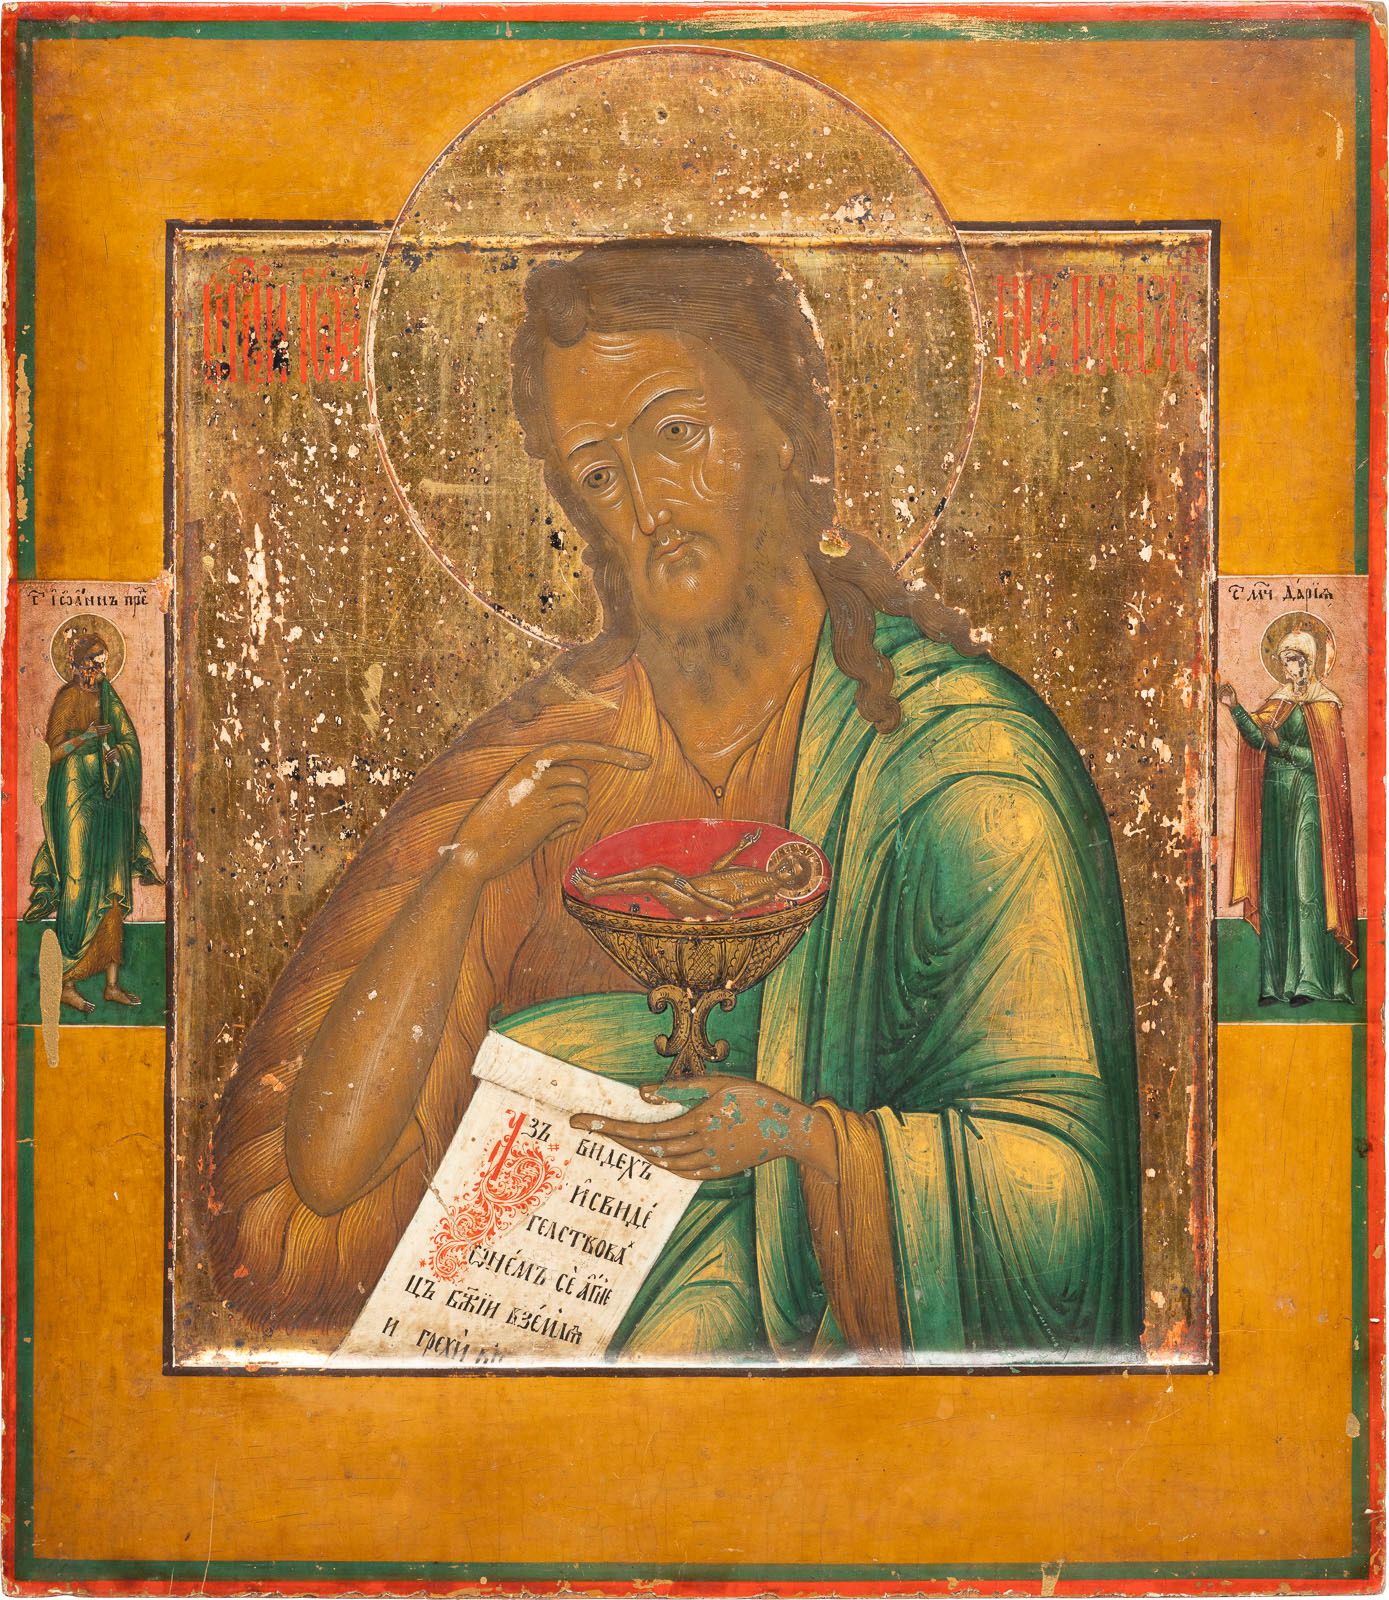 AN ICON SHOWING ST. JOHN THE FORERUNNER FROM A DEISIS 圣约翰的圣像俄罗斯，19世纪初 石膏木板上的淡彩画，&hellip;